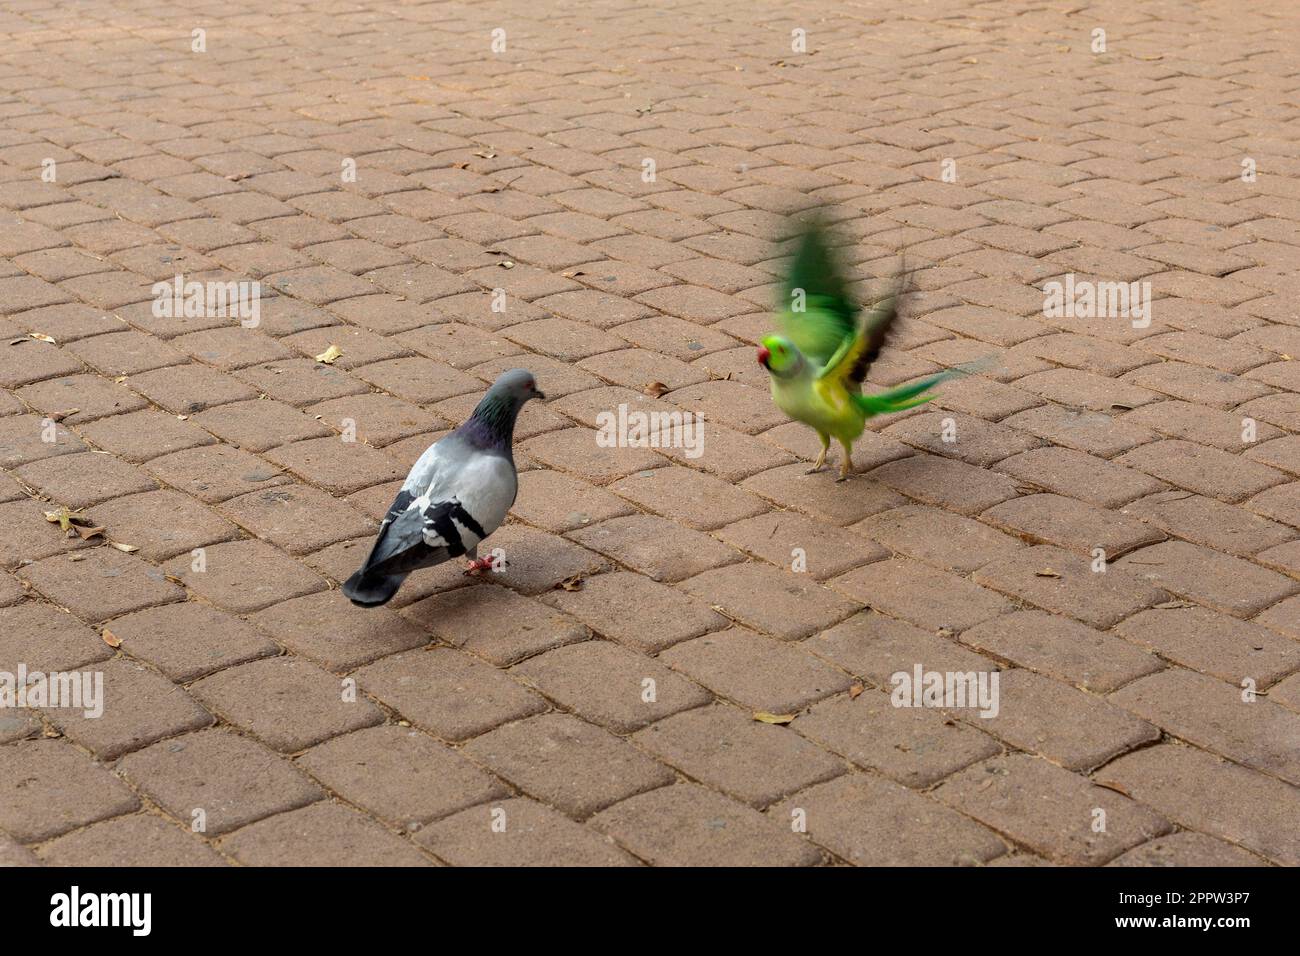 Parakeet flapping wings at pigeon on cobblestone Stock Photo